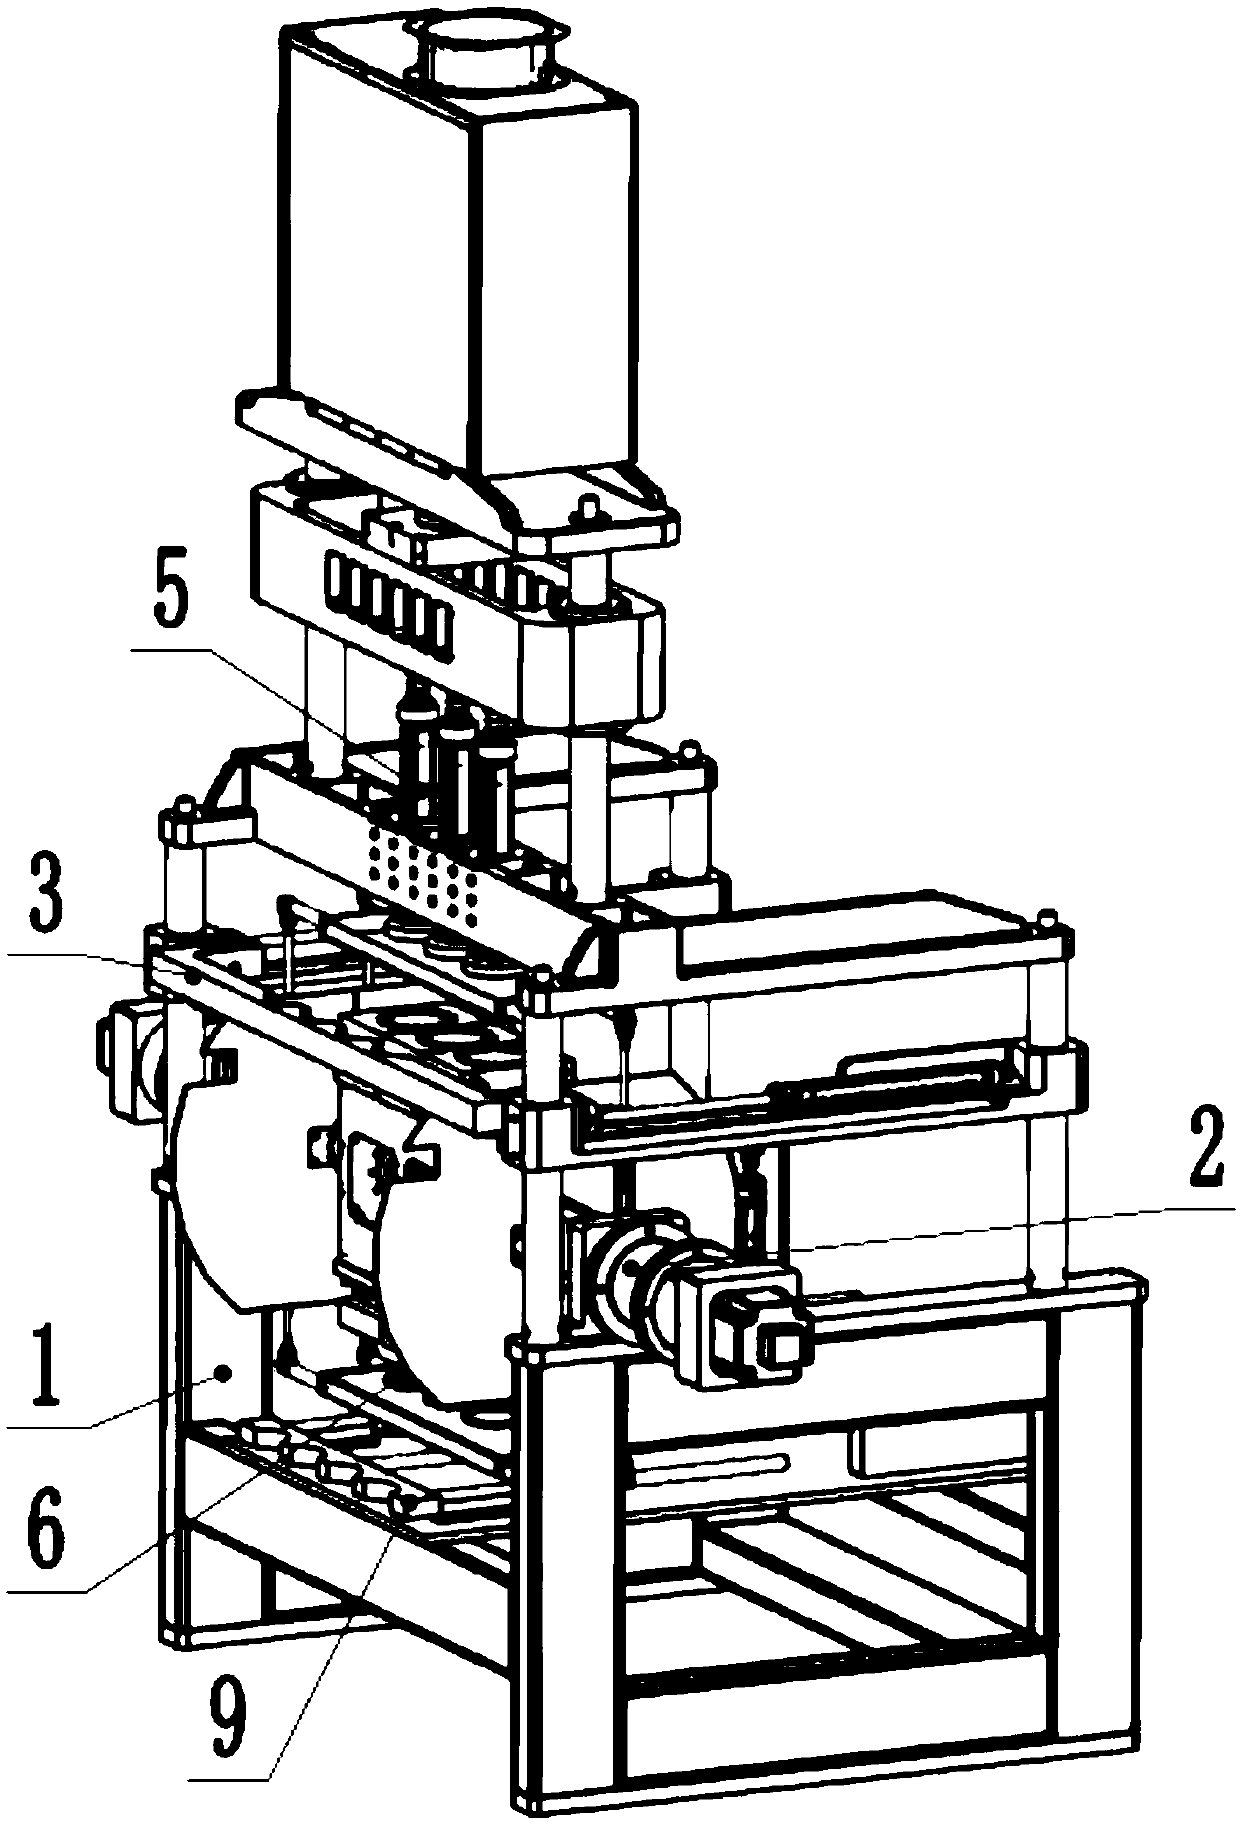 Glass forming press